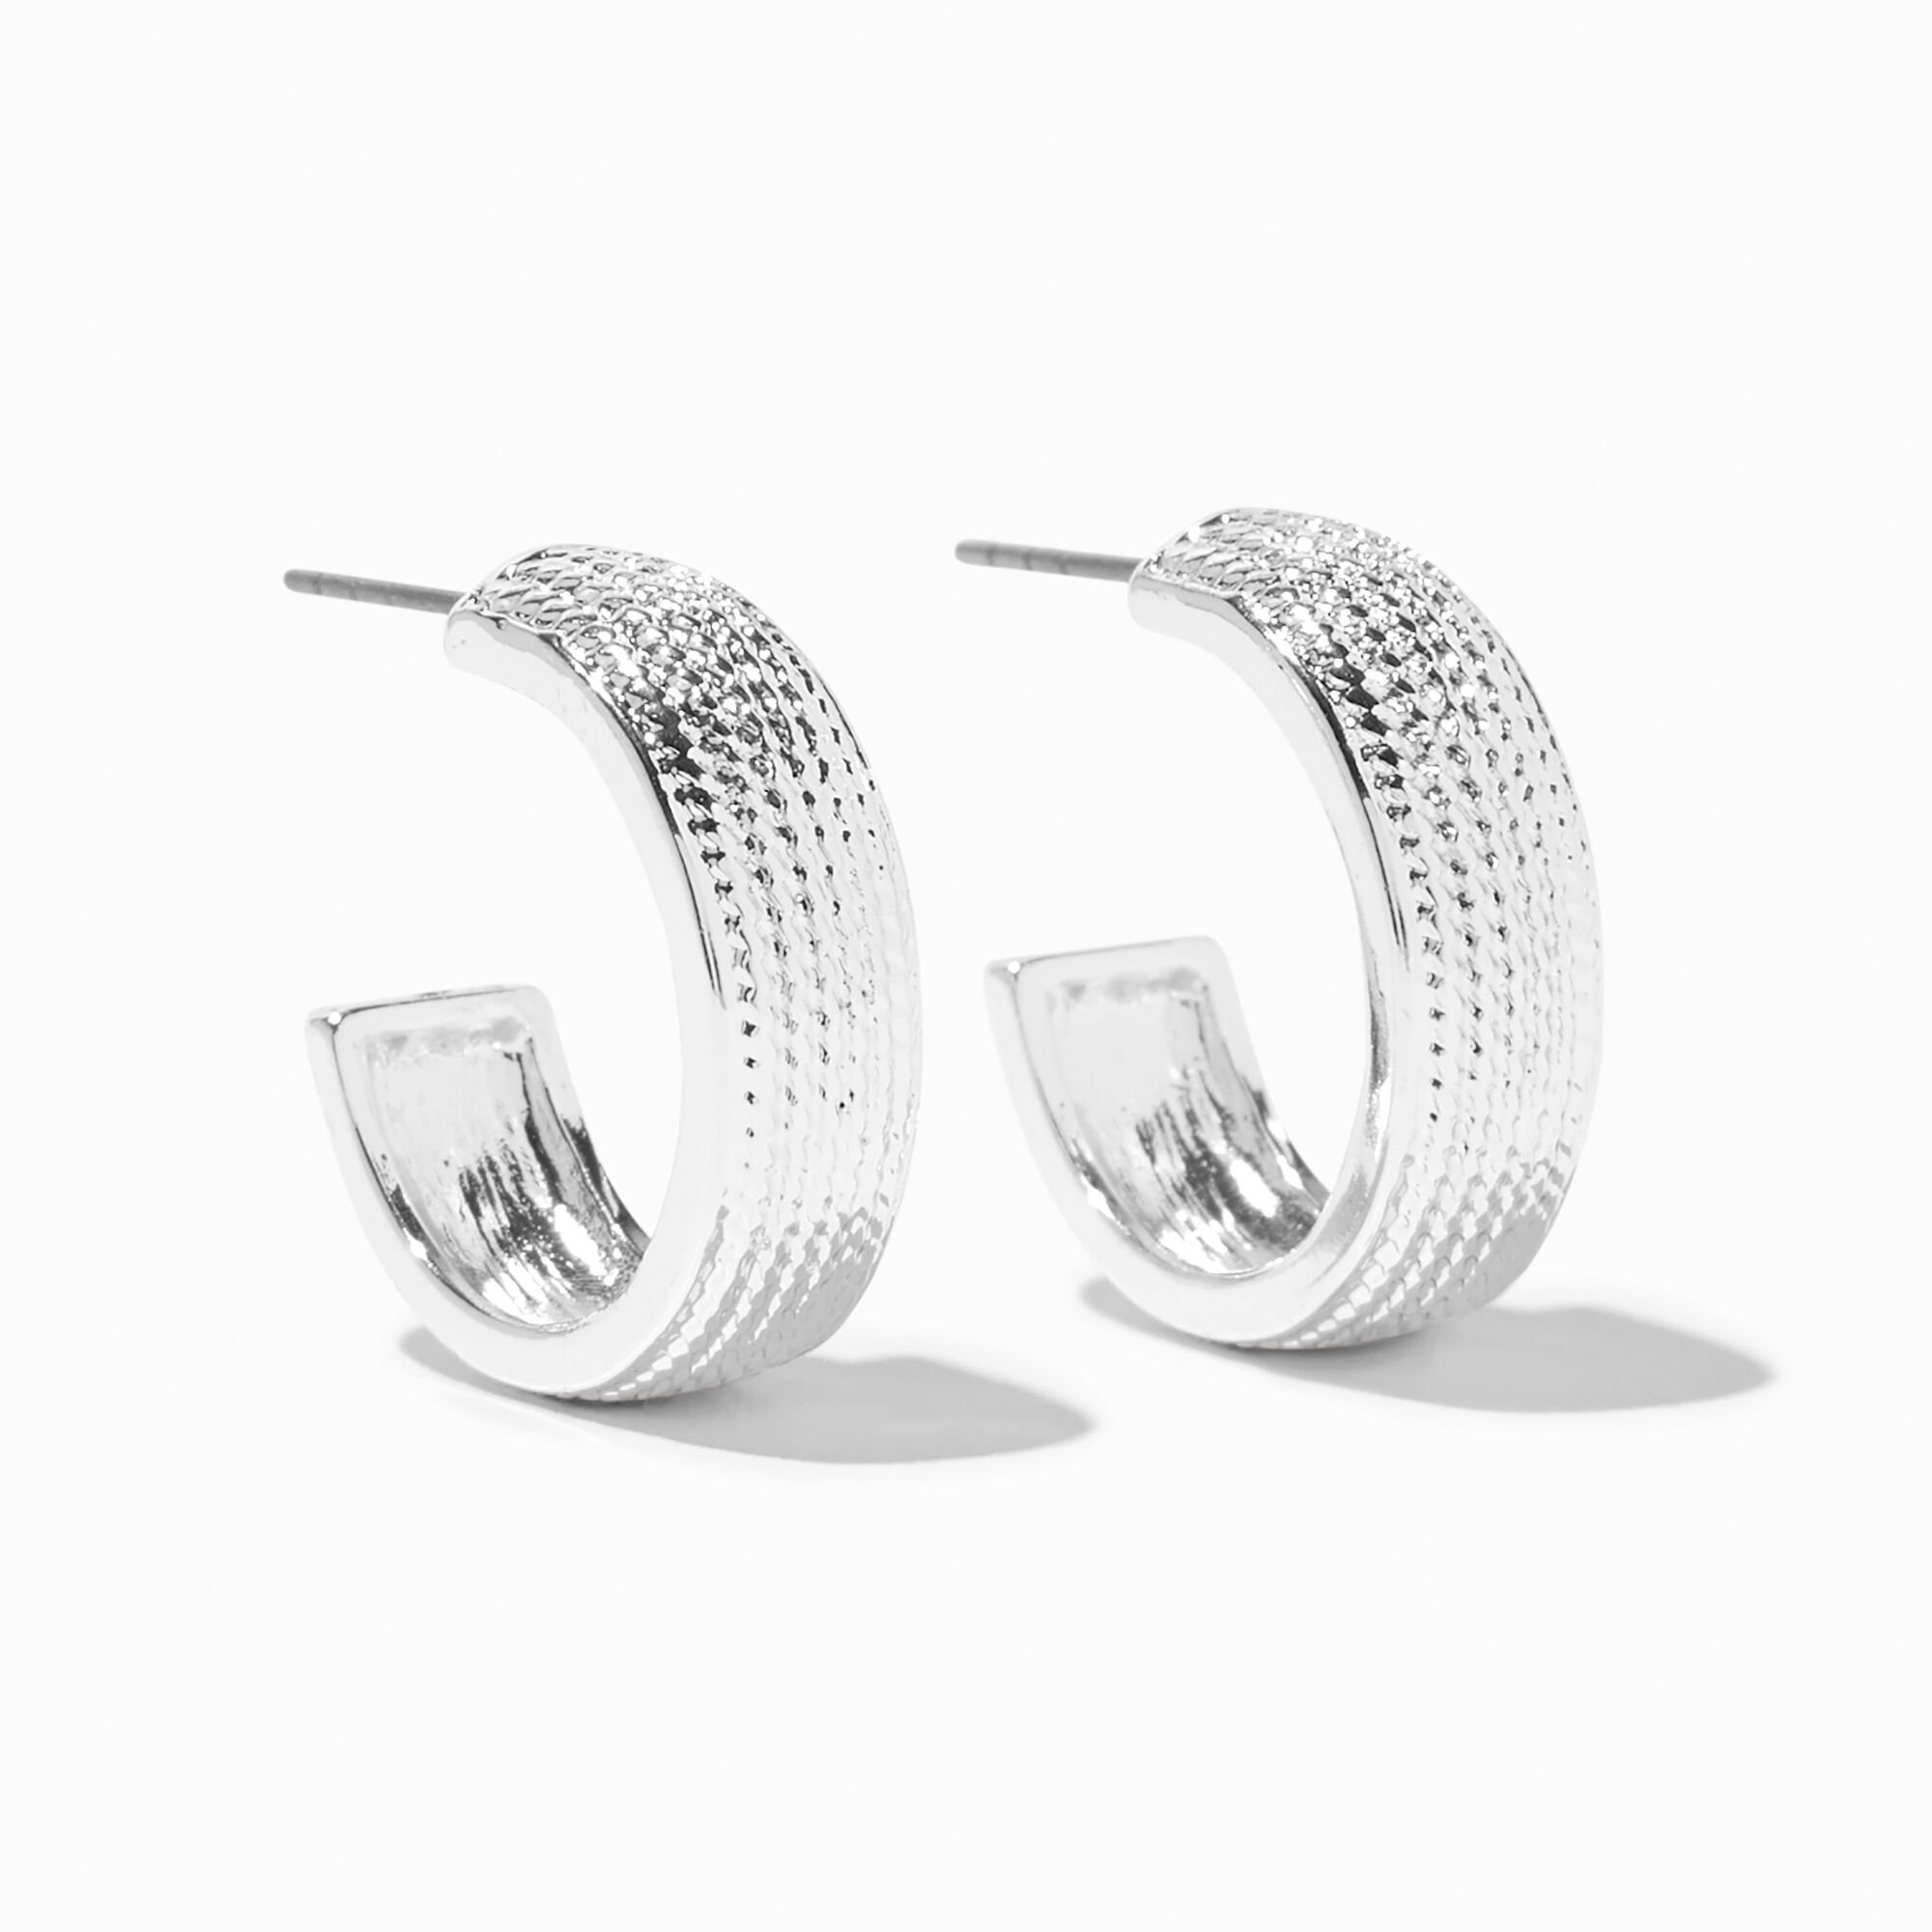 View Claires Siilver Tire Print 20MM Hoop Earrings Silver information